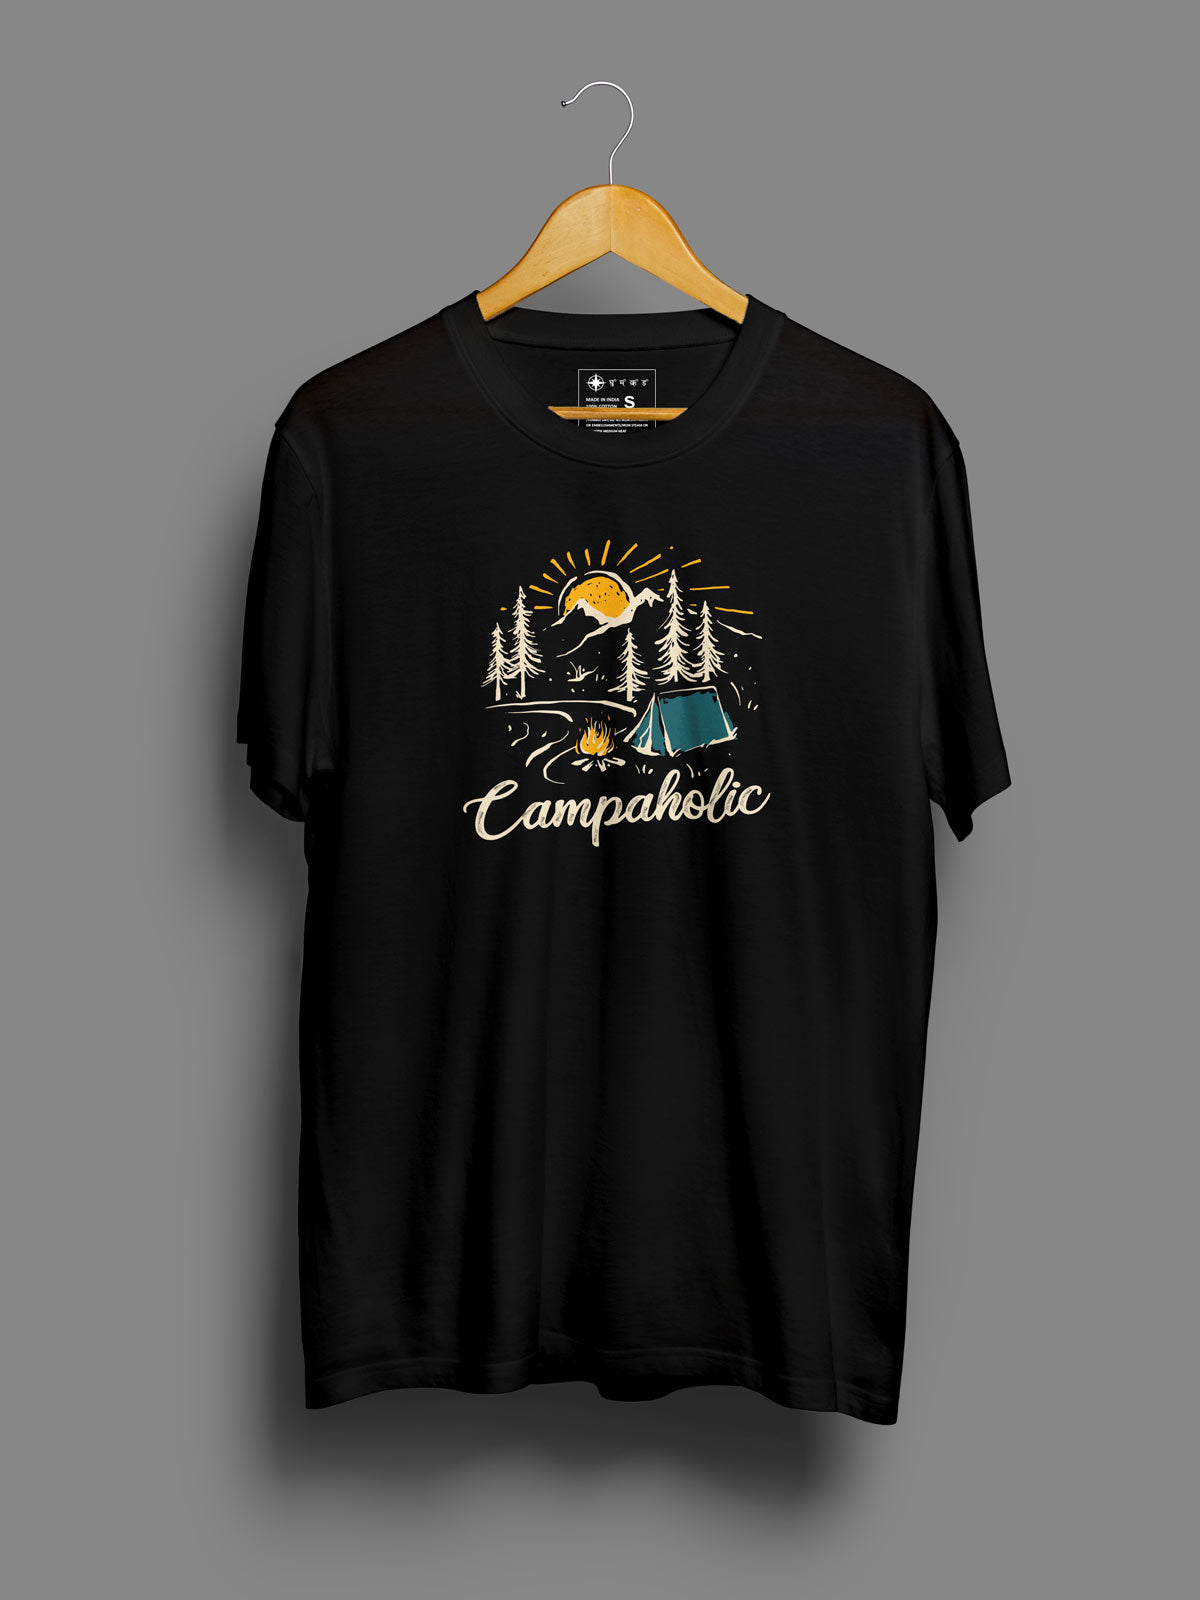 Campaholic-printed-t-shirt-for-men by Ghumakkad